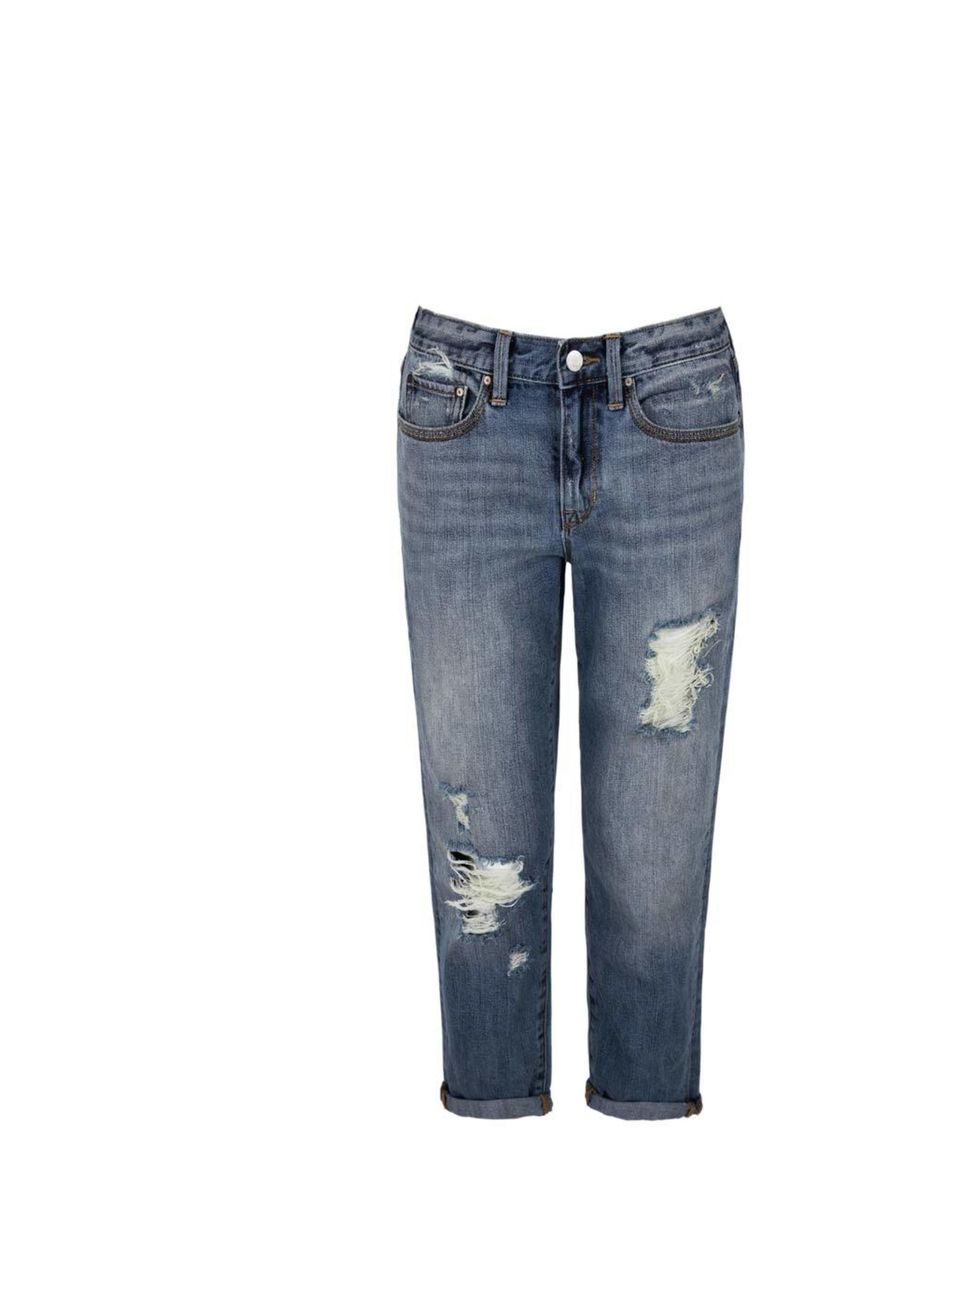 <p>These boyfriend jeans are really well cut; I've already bought them in indigo selvage, and now I'm after a mid-blue pair for summer.</p><p>- Donna Wallace, Accessories Editor</p><p><a href="http://www.gap.co.uk/browse/product.do?cid=57396&vid=1&pid=000